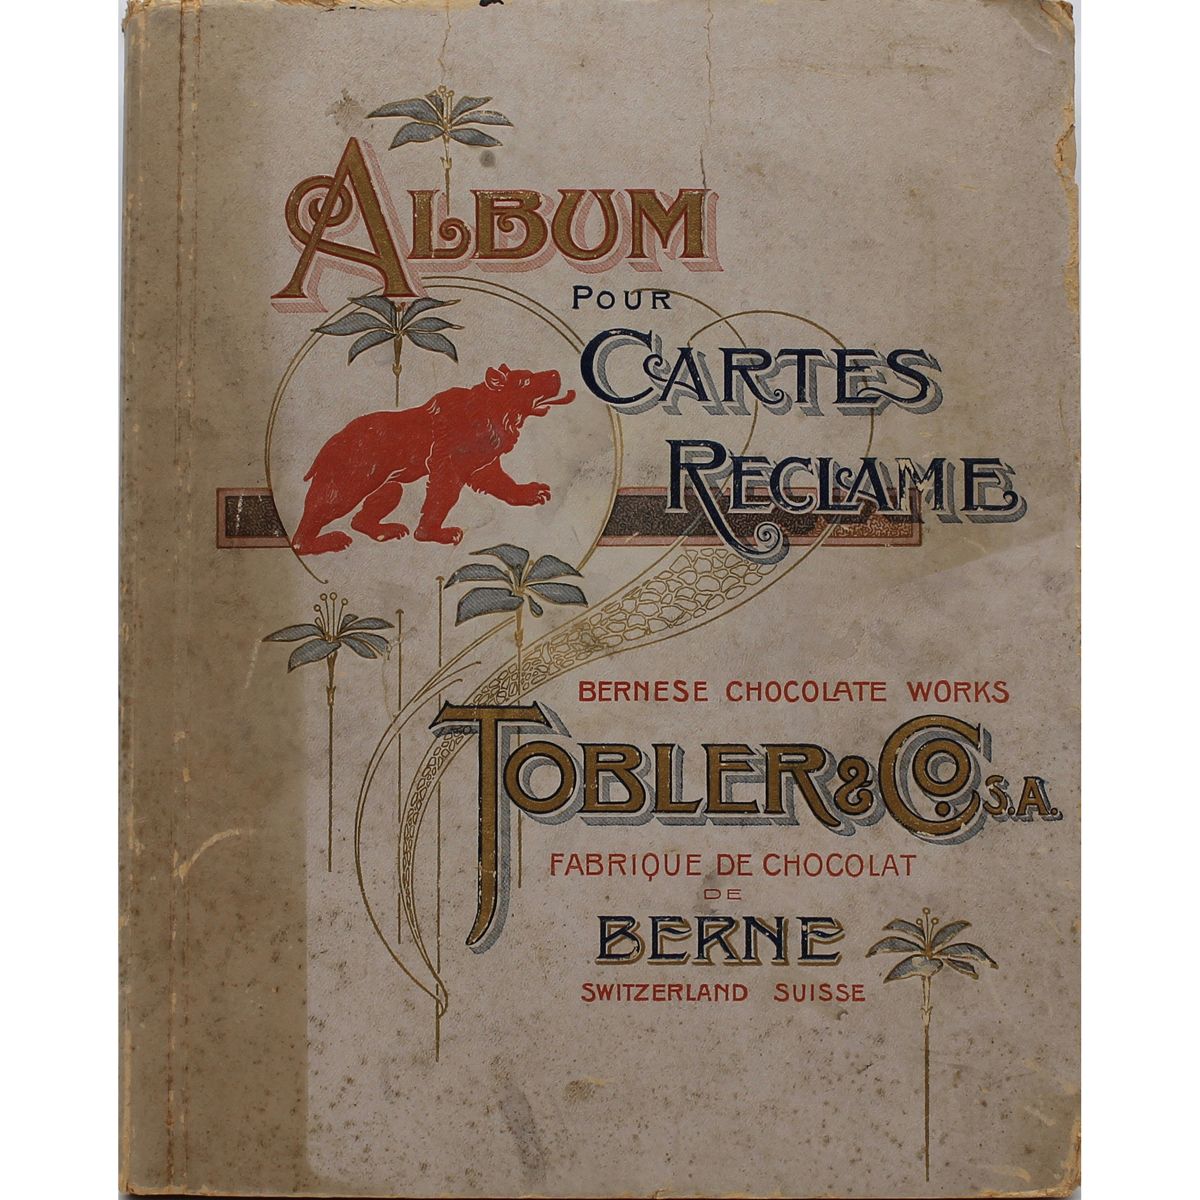 ALBUM POUR CARTES RECLAME "Tobler & Co." Early 20th century
Early 20th century